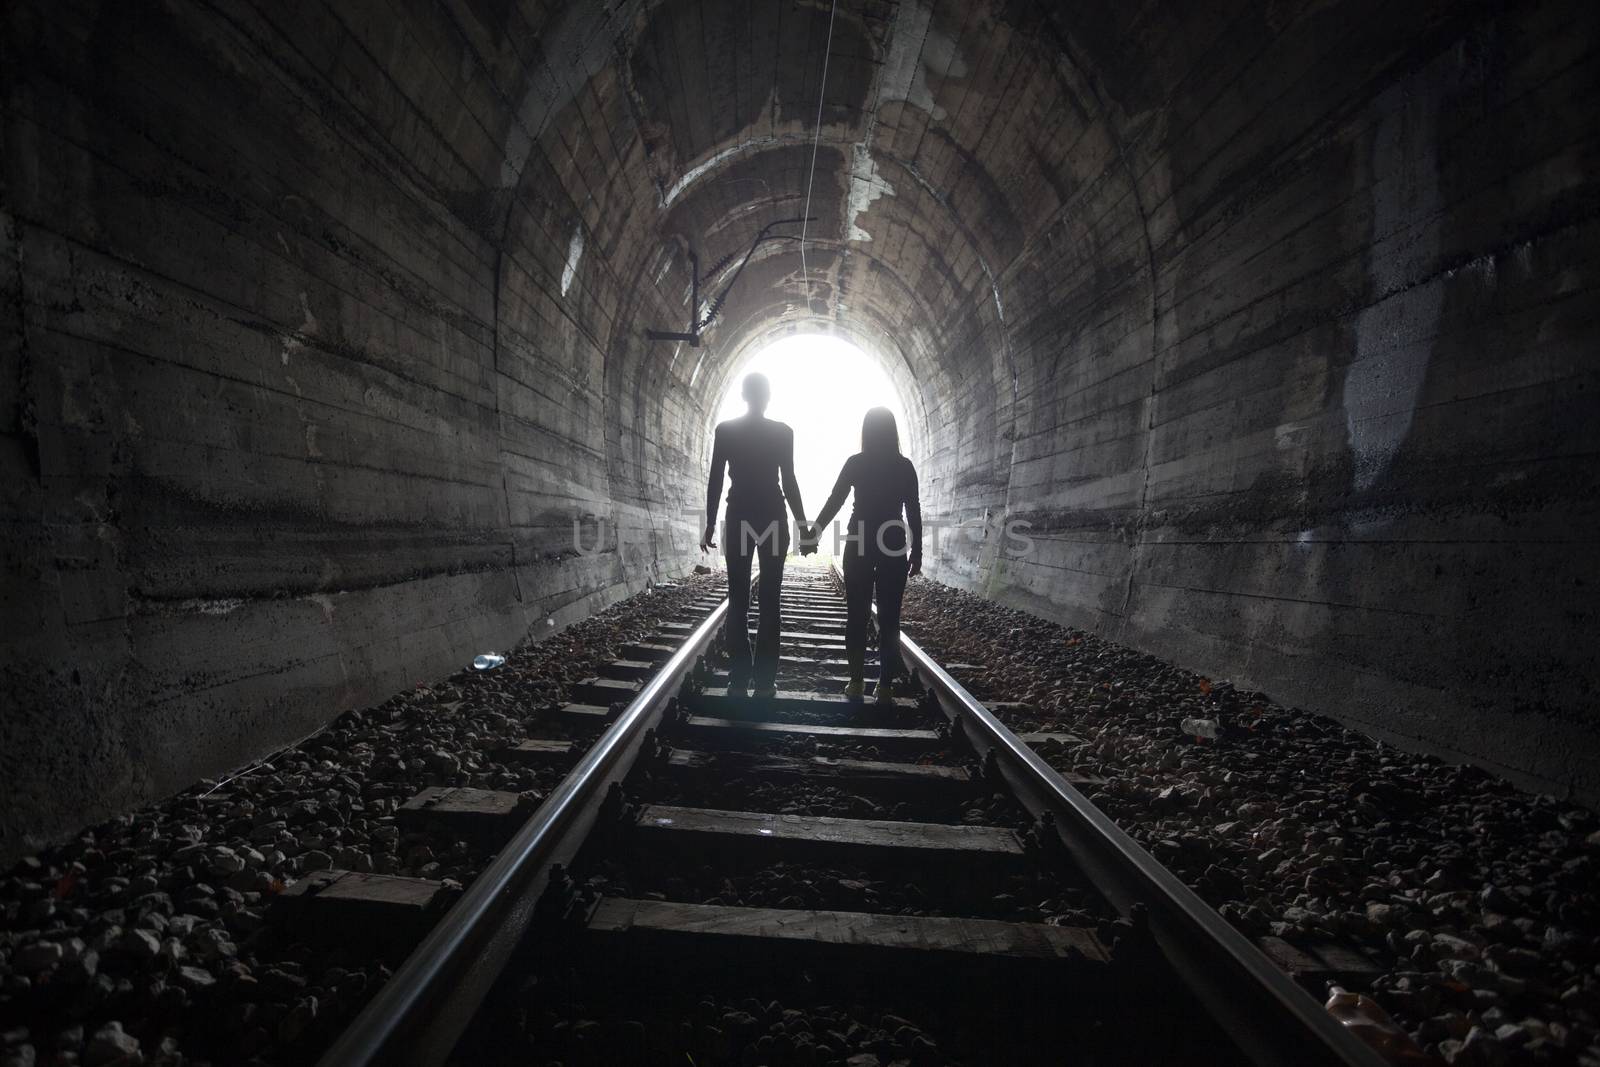 Couple walking together through a railway tunnel by adamr